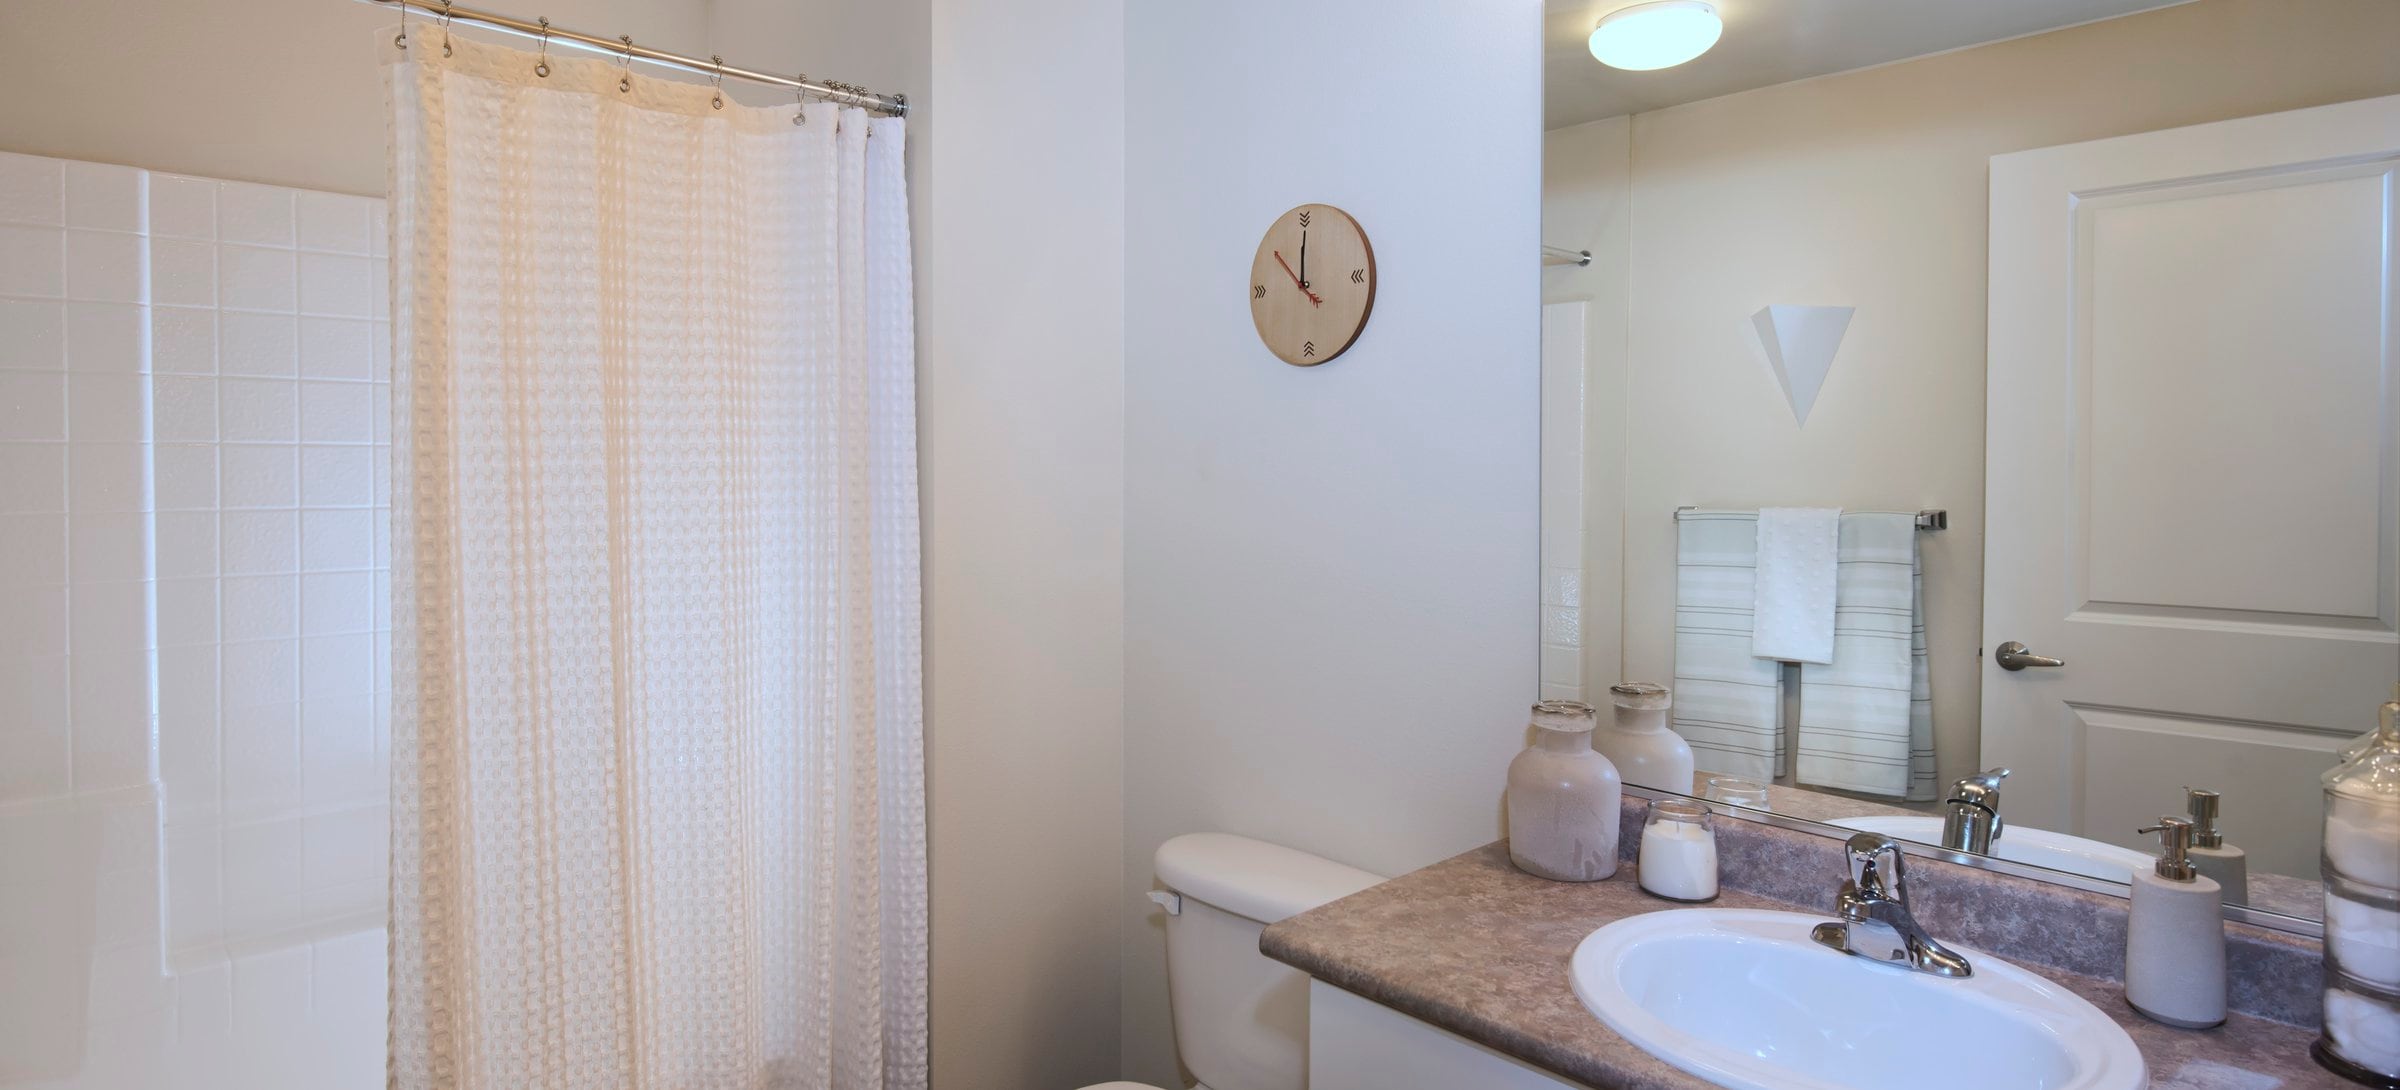 Classic Package I bath with white cabinetry, laminate countertops, and tile flooring